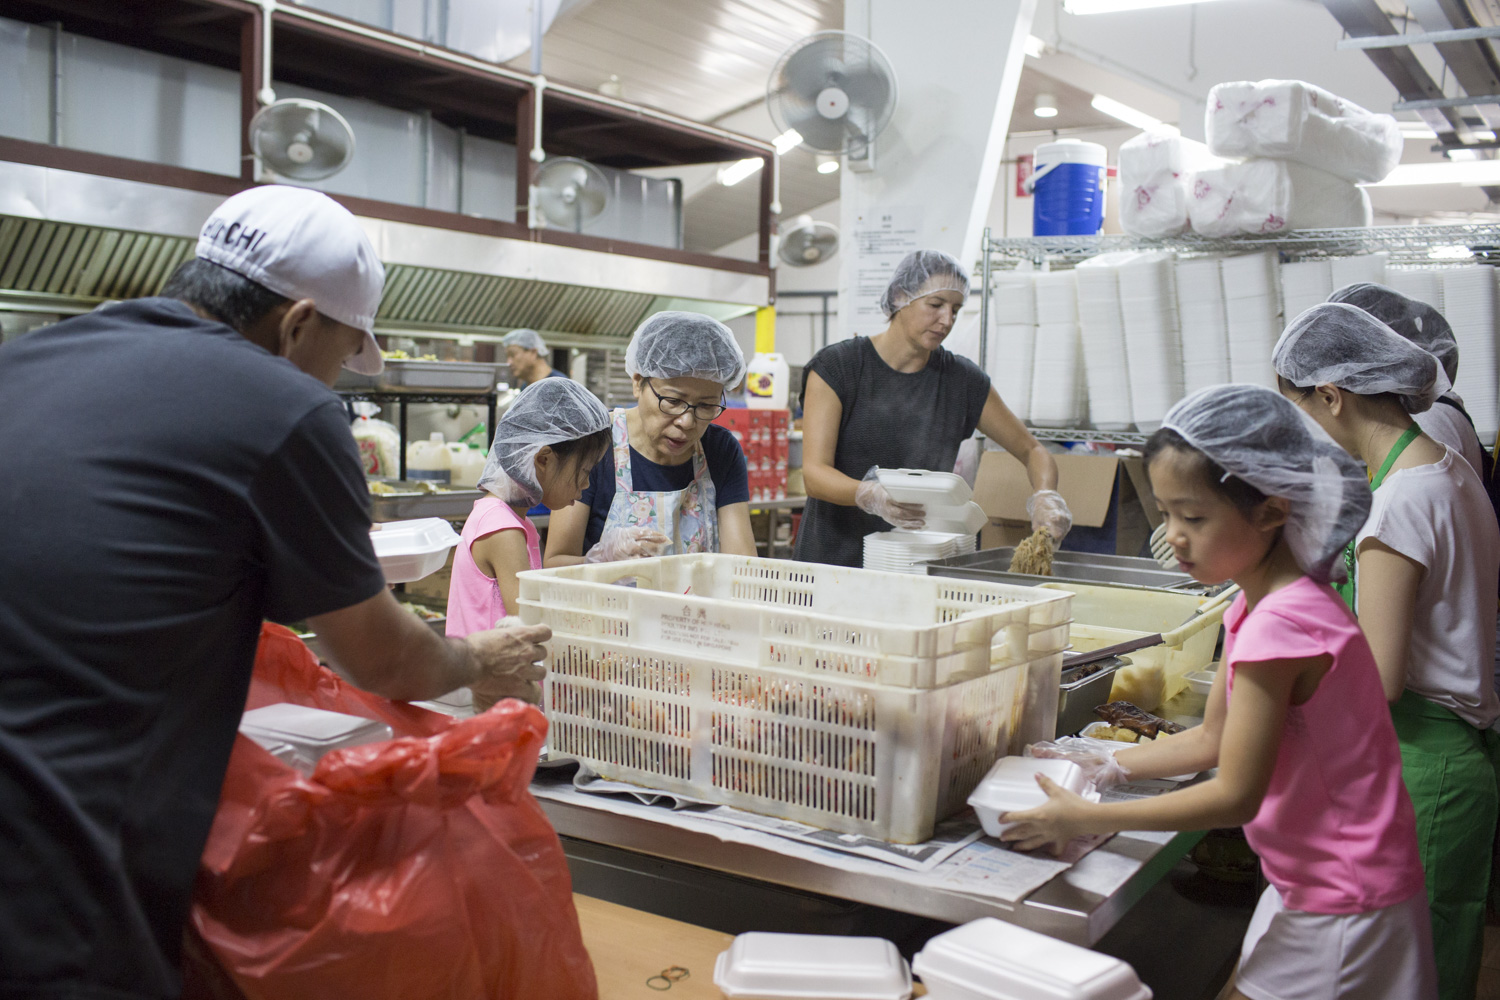 The girls make themselves useful, diving right into the heat of activity with other volunteers in the kitchen.